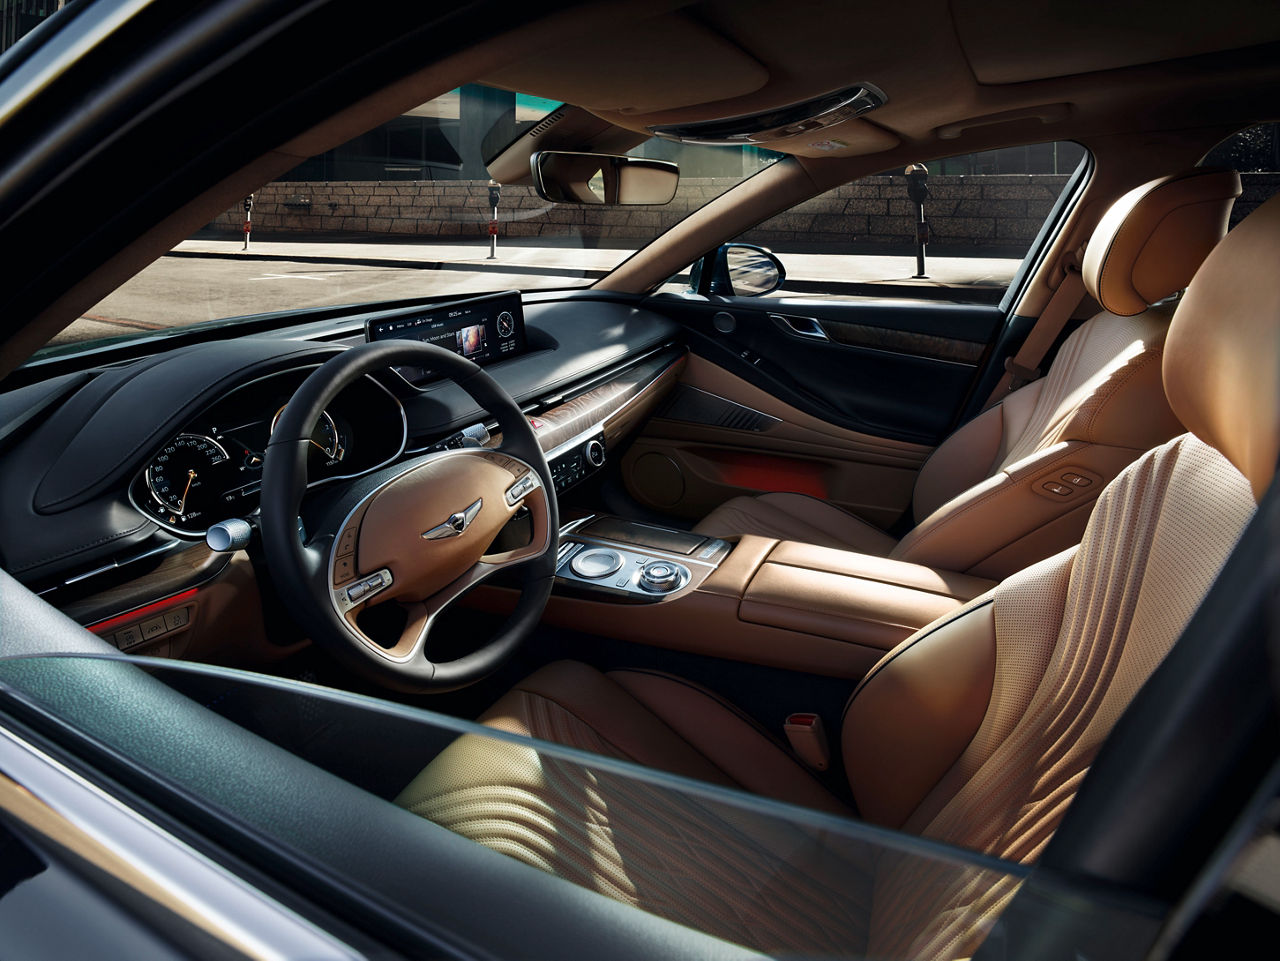 View through the window of the front compartment of the Genesis G80 with beige and black interior